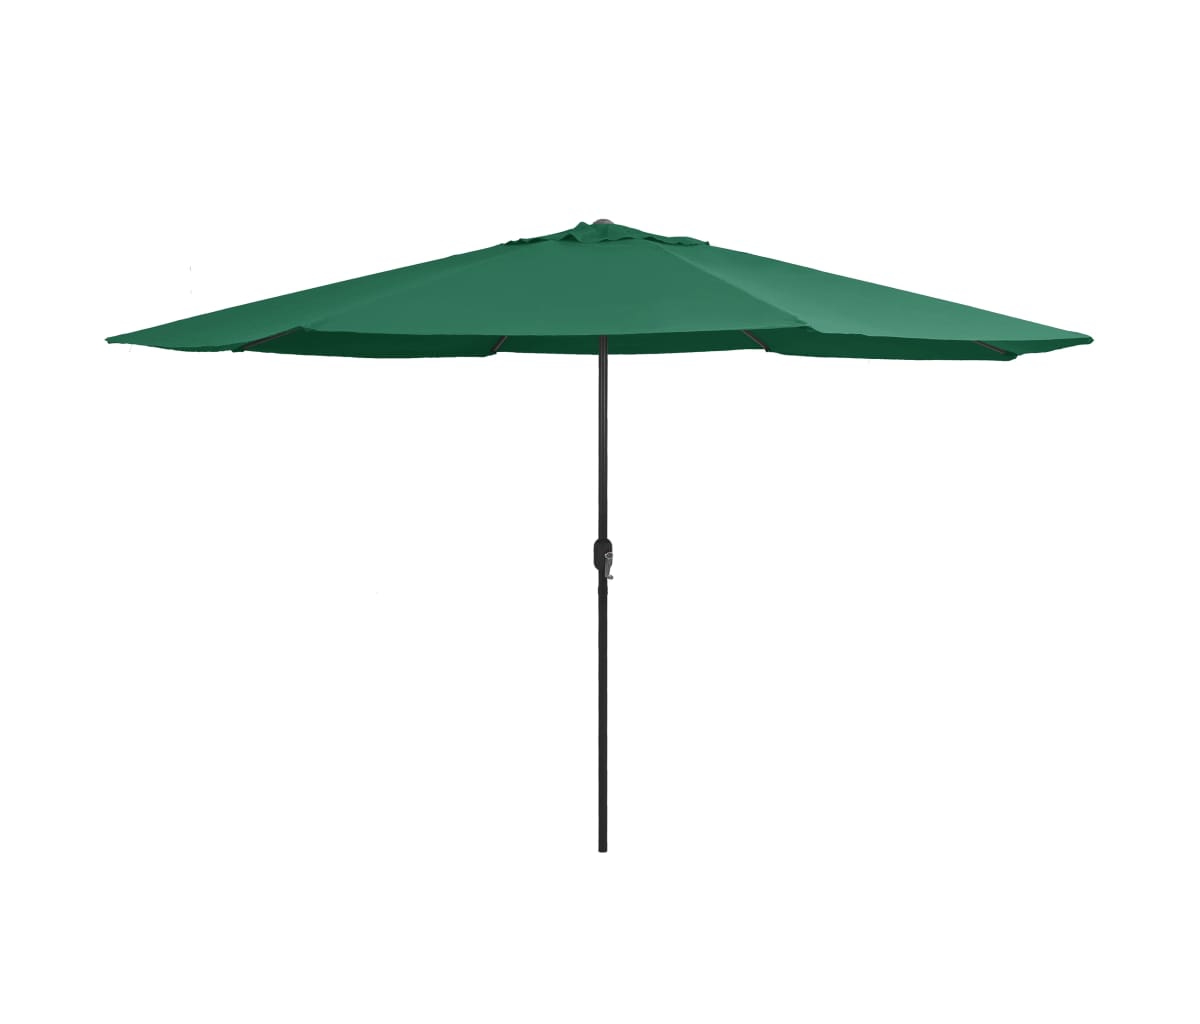 Outdoor Parasol with Metal Pole 157.5" Green - Green